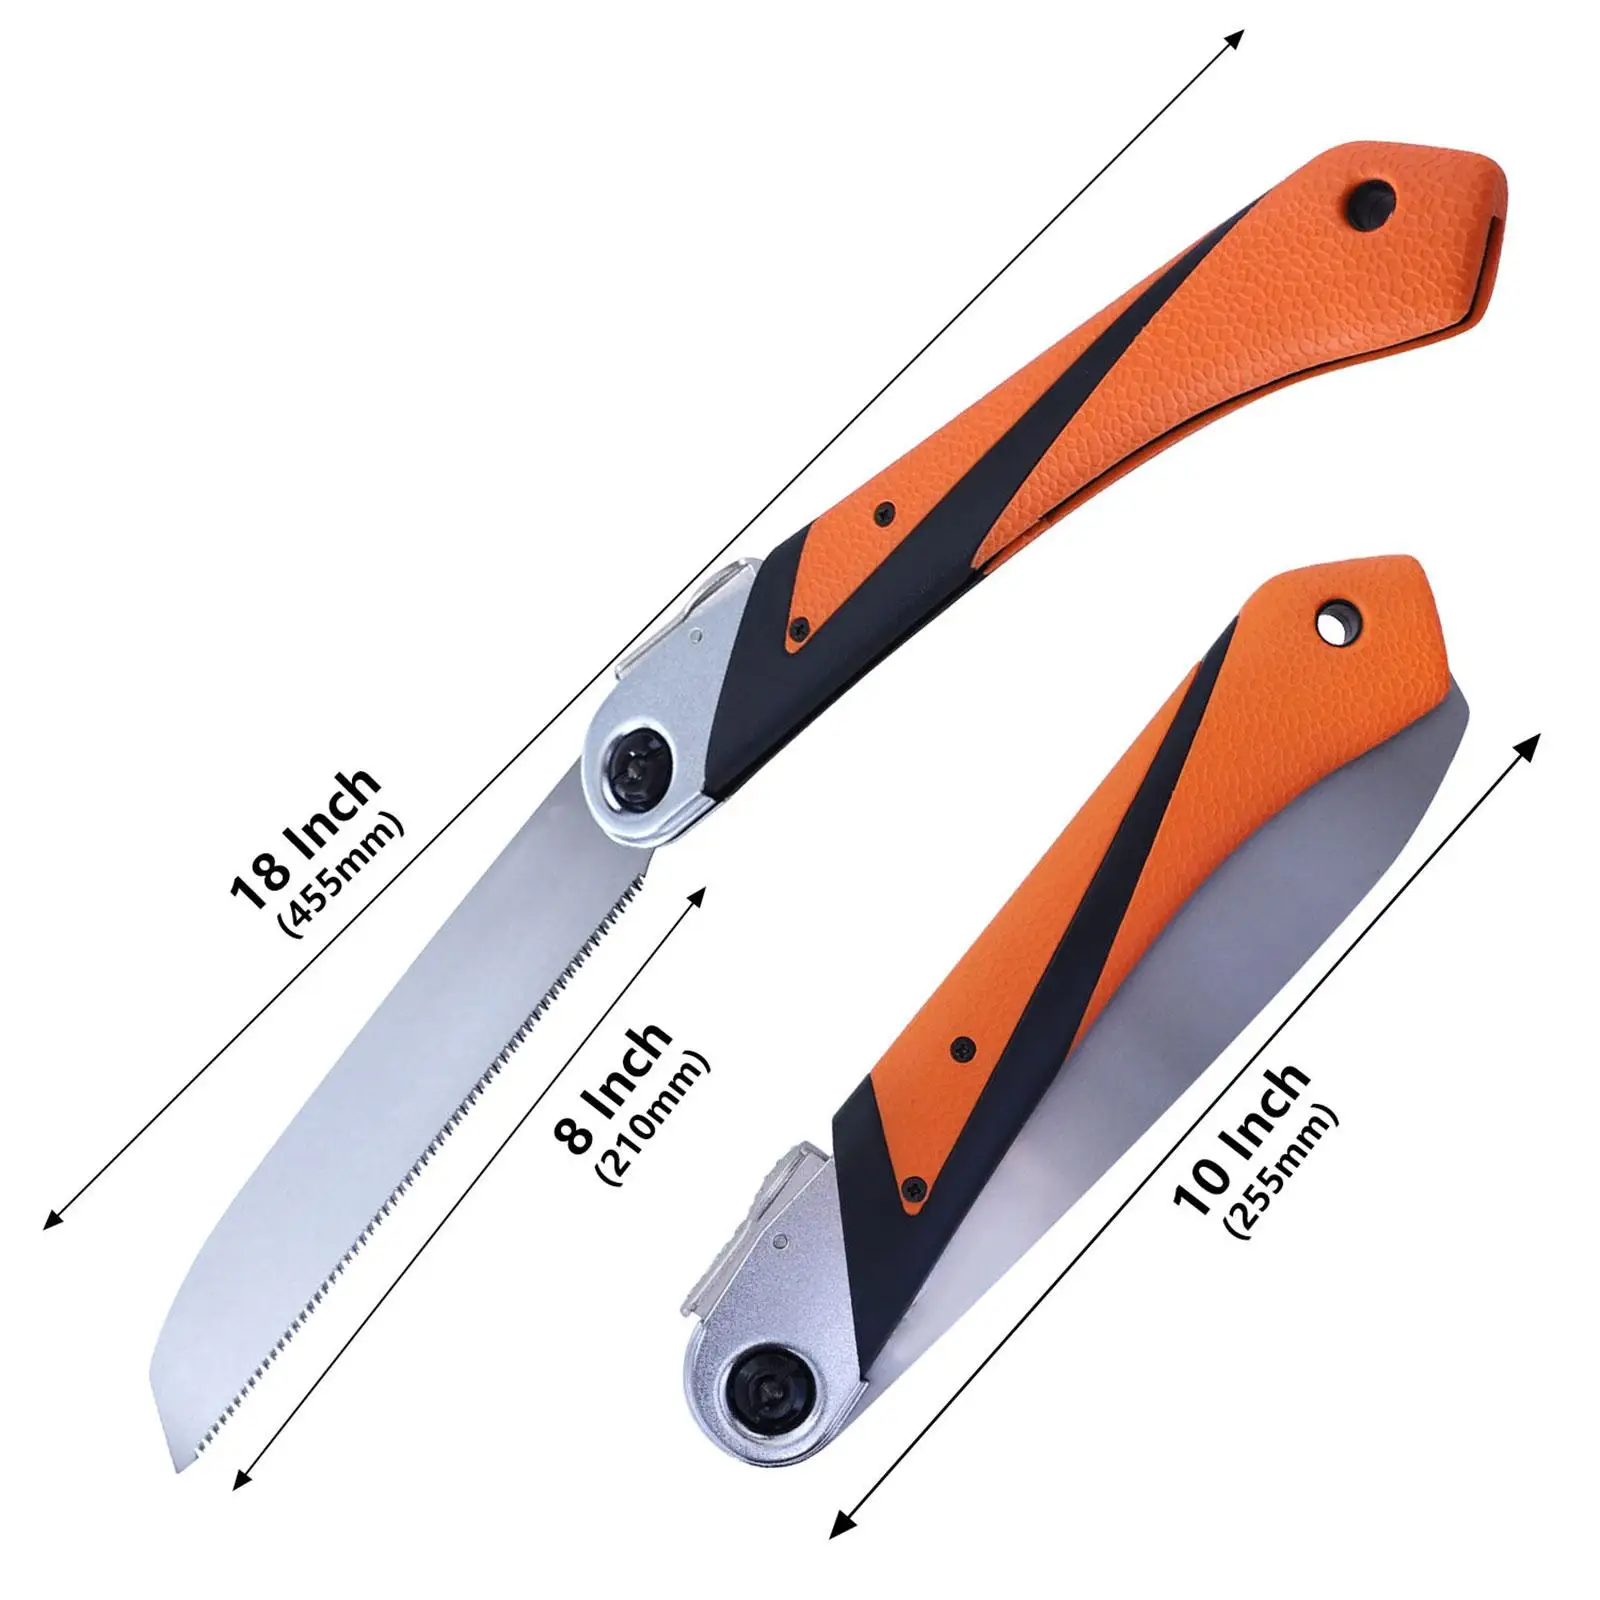 Portable Folding Saw Lightweight Trimming Durable Quick Sawing Pruning Saw for Gardening Carpentry Camping Climbing Backpacking